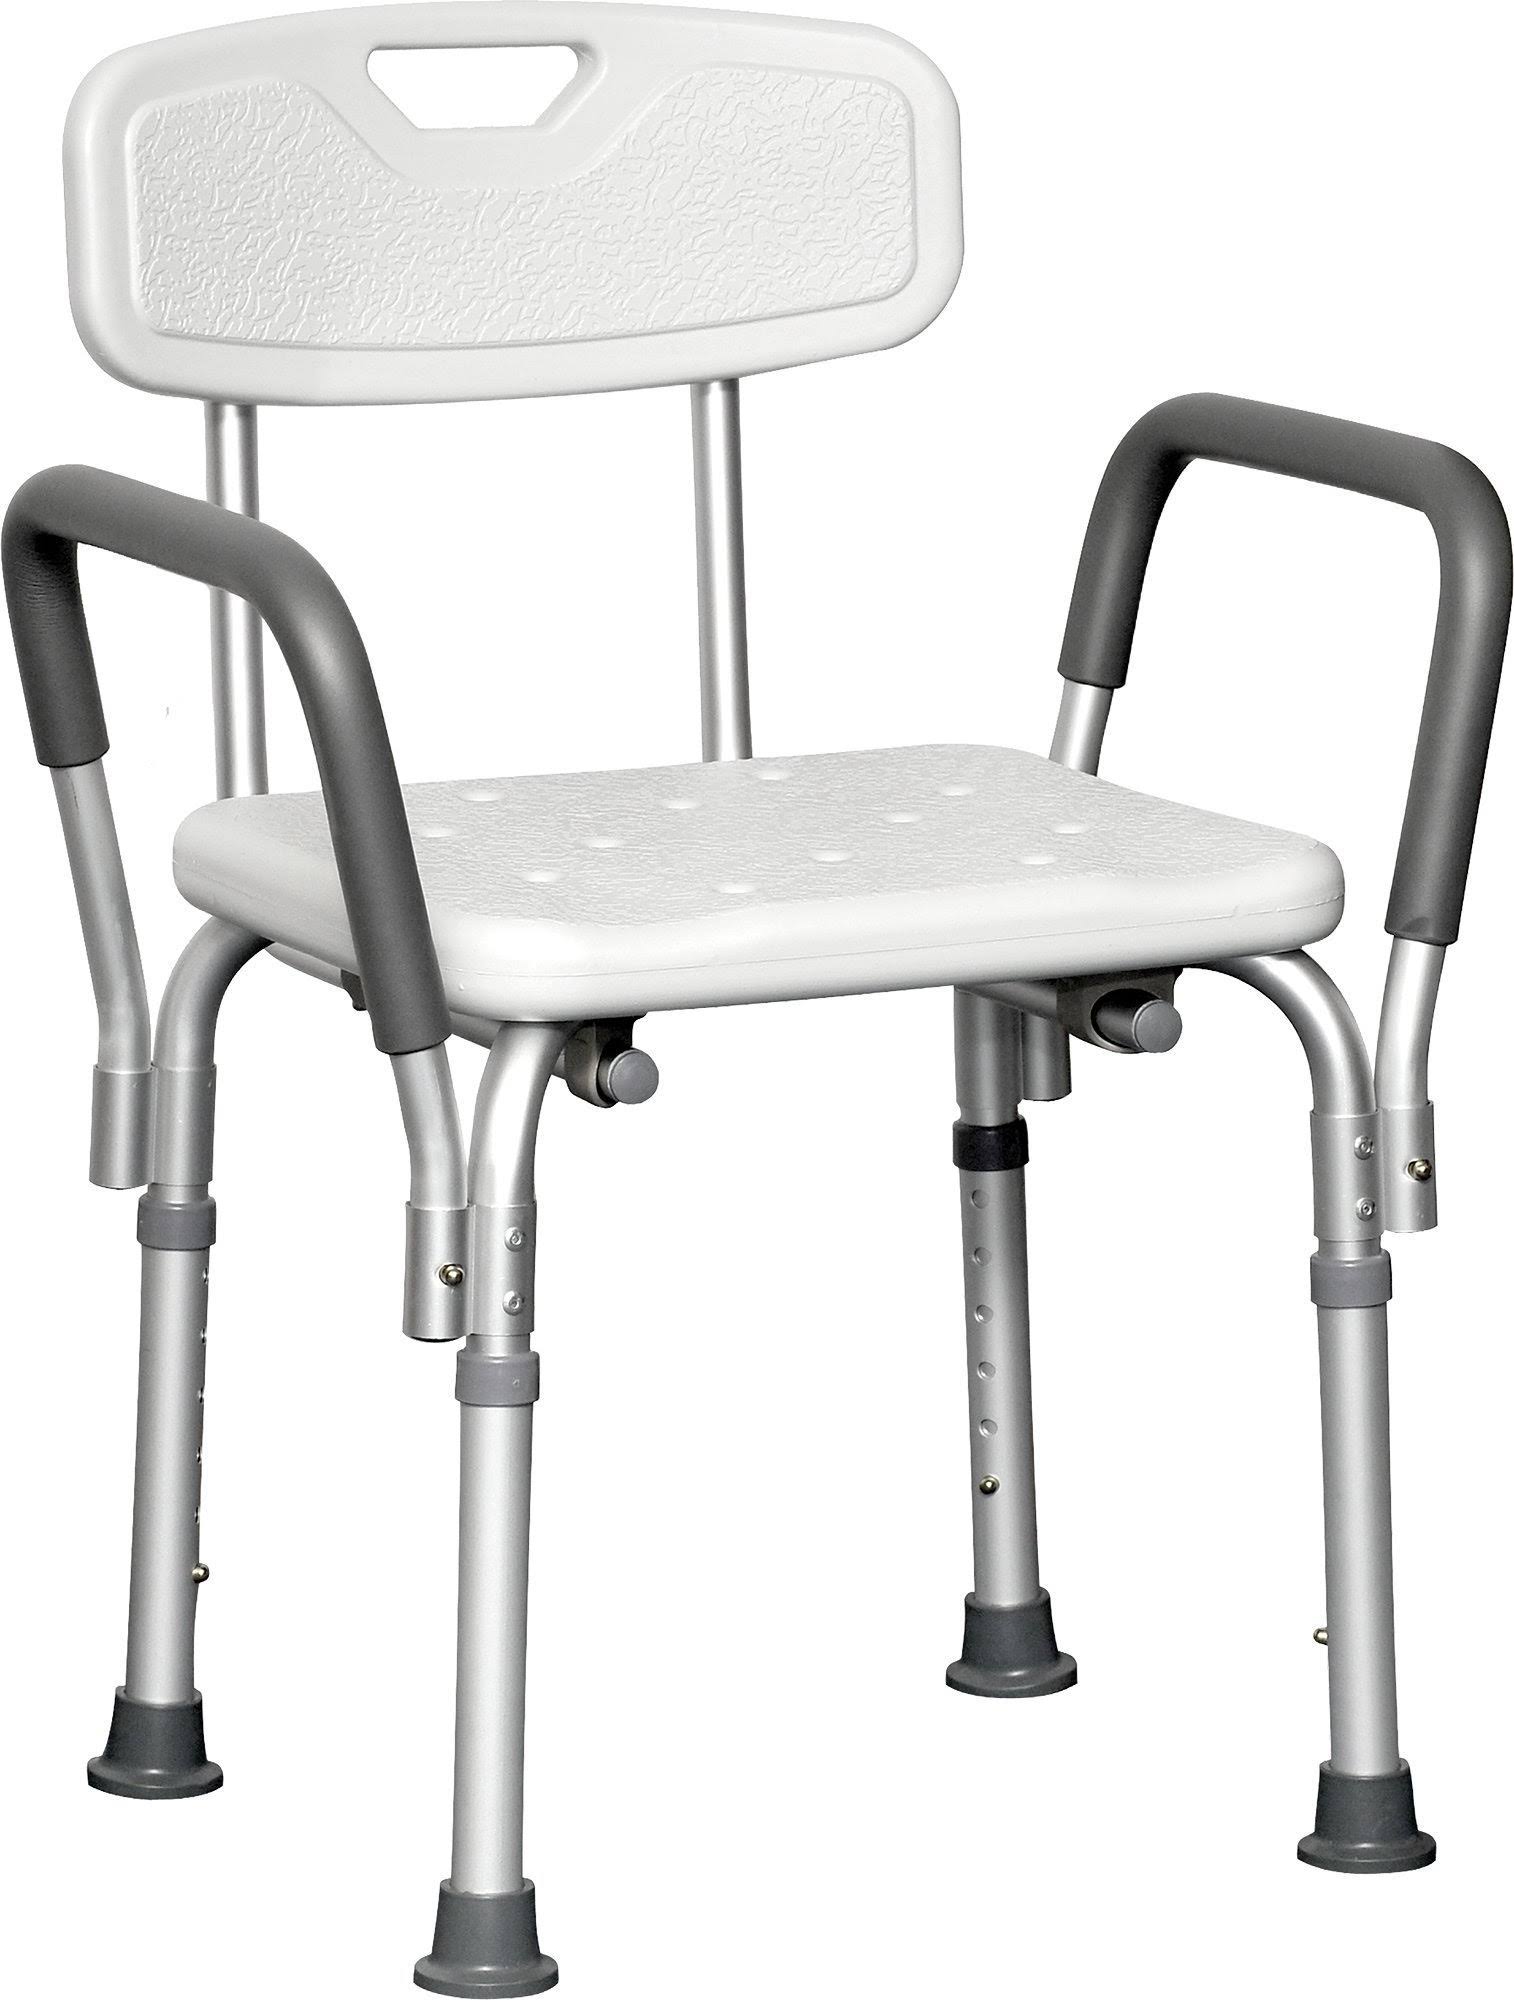 Probasics - Bath / Shower Chair With Arms